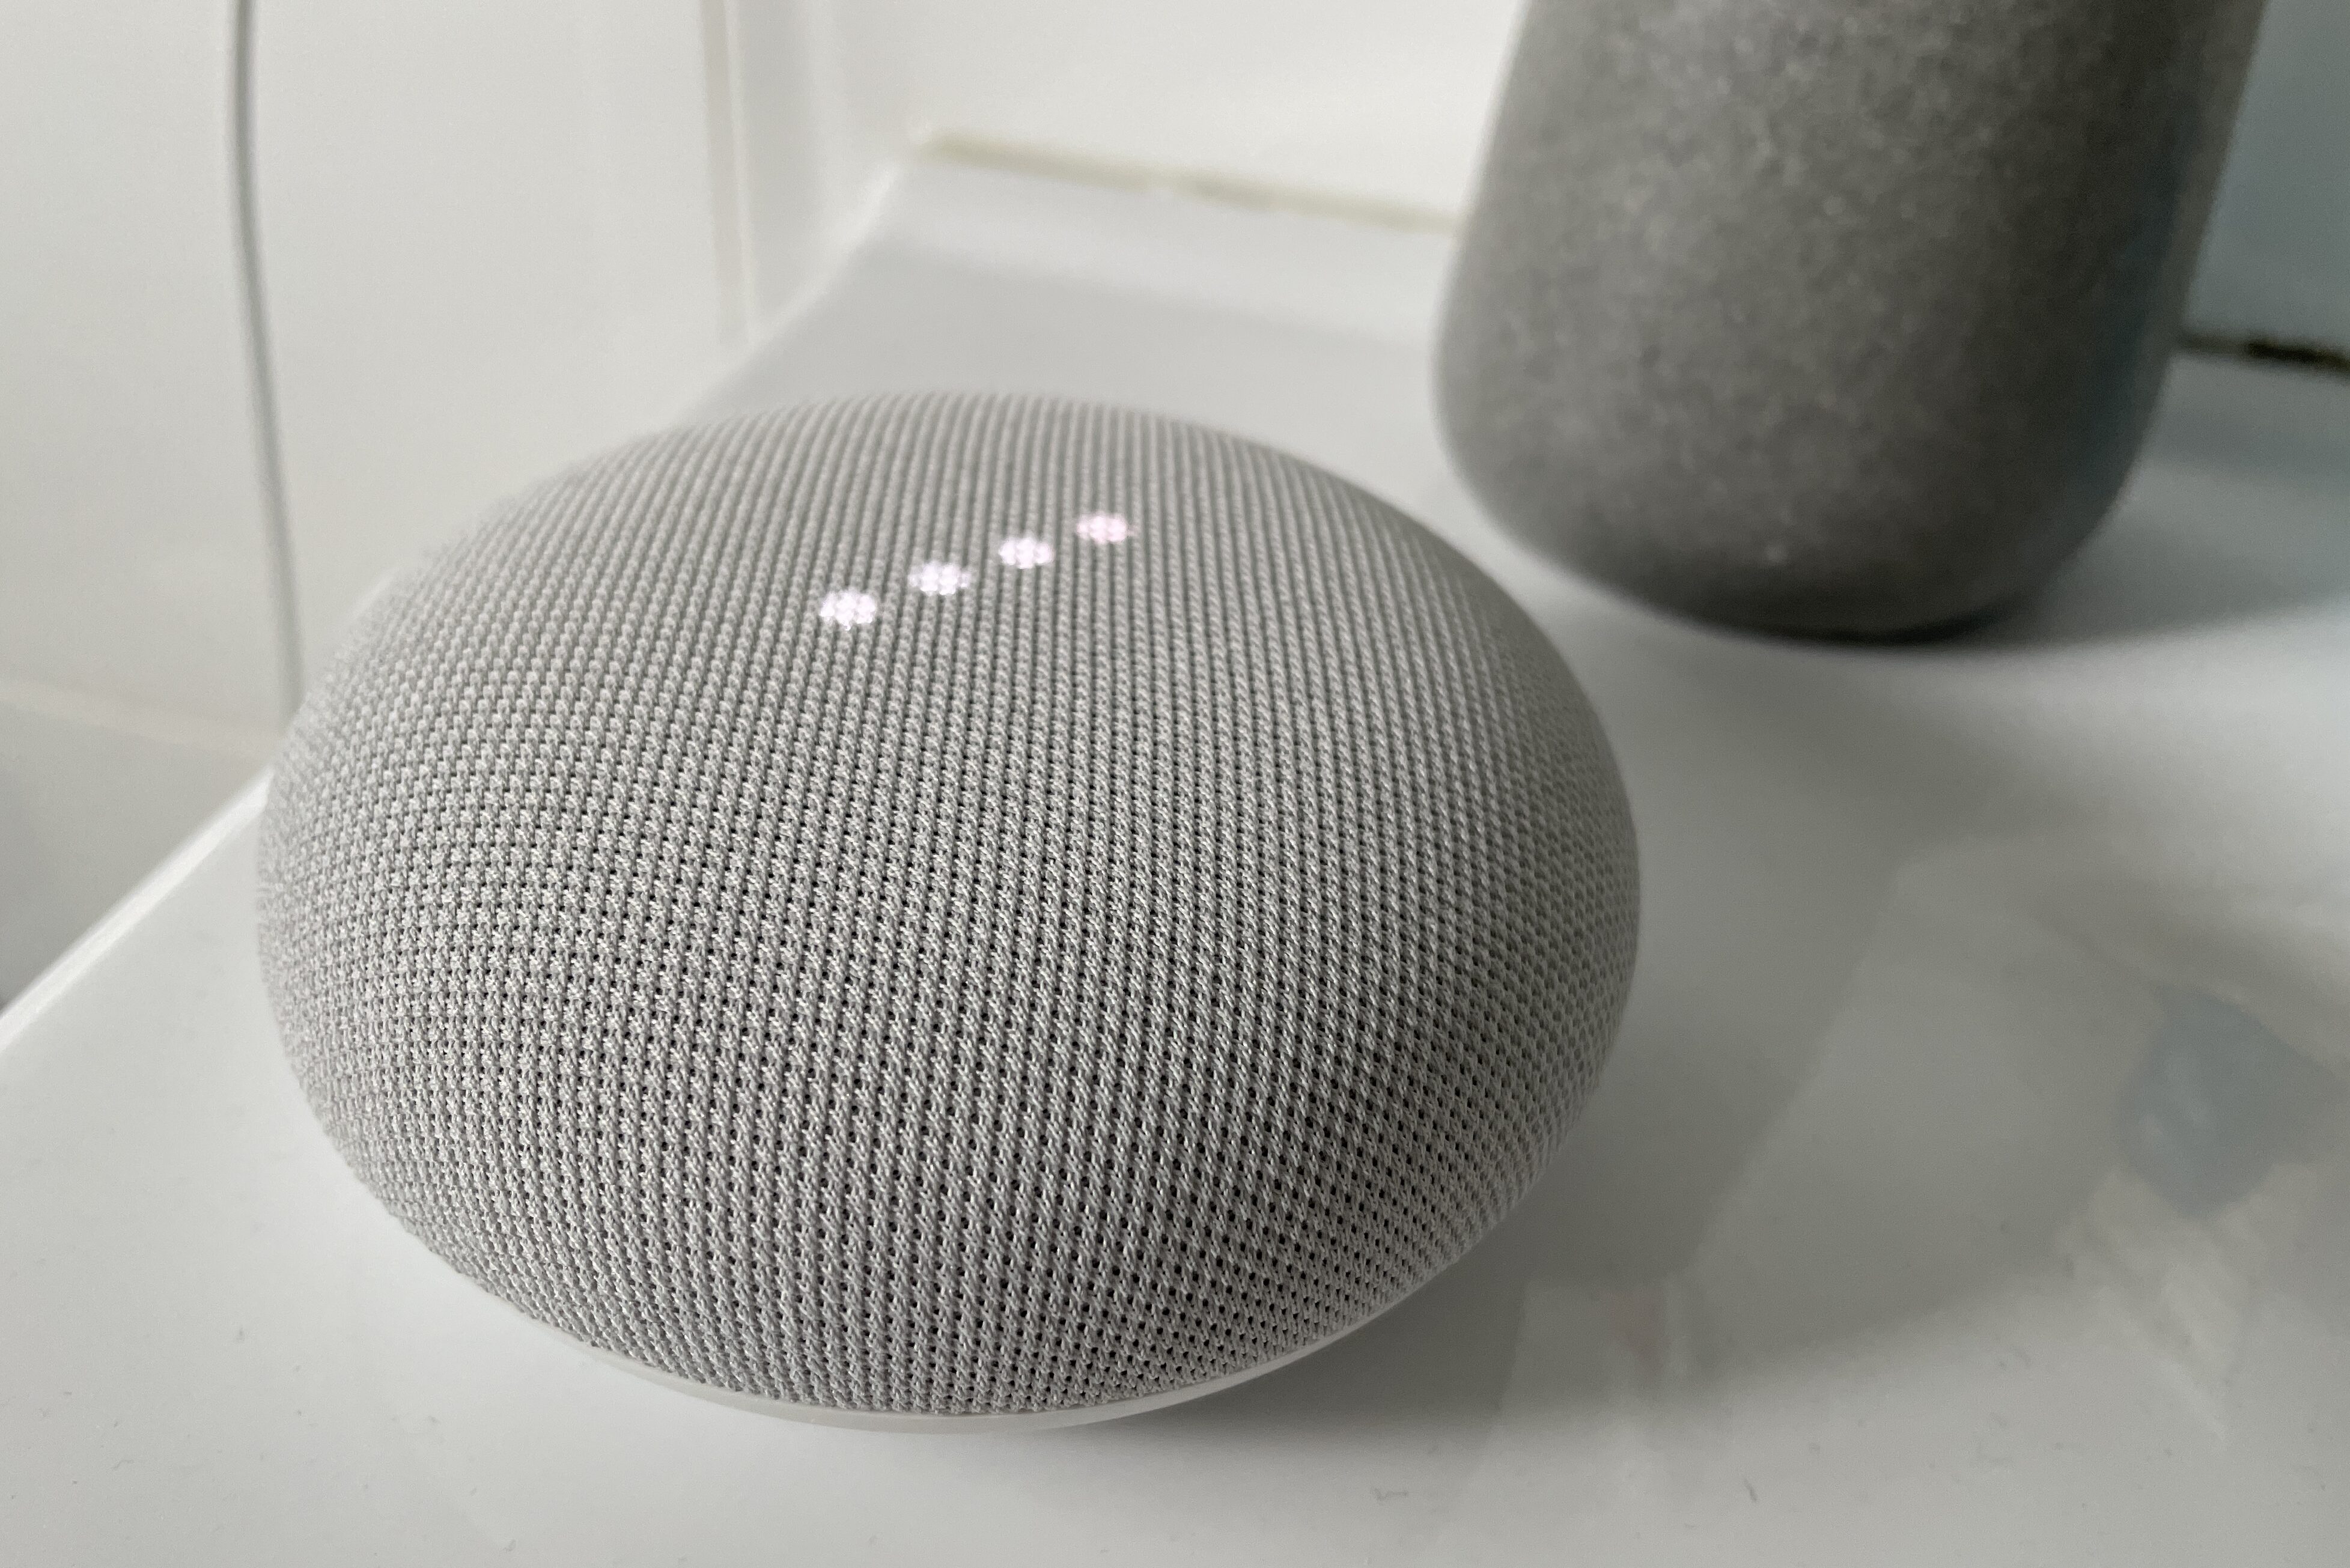 Google Nest Mini review: small in size, big on features